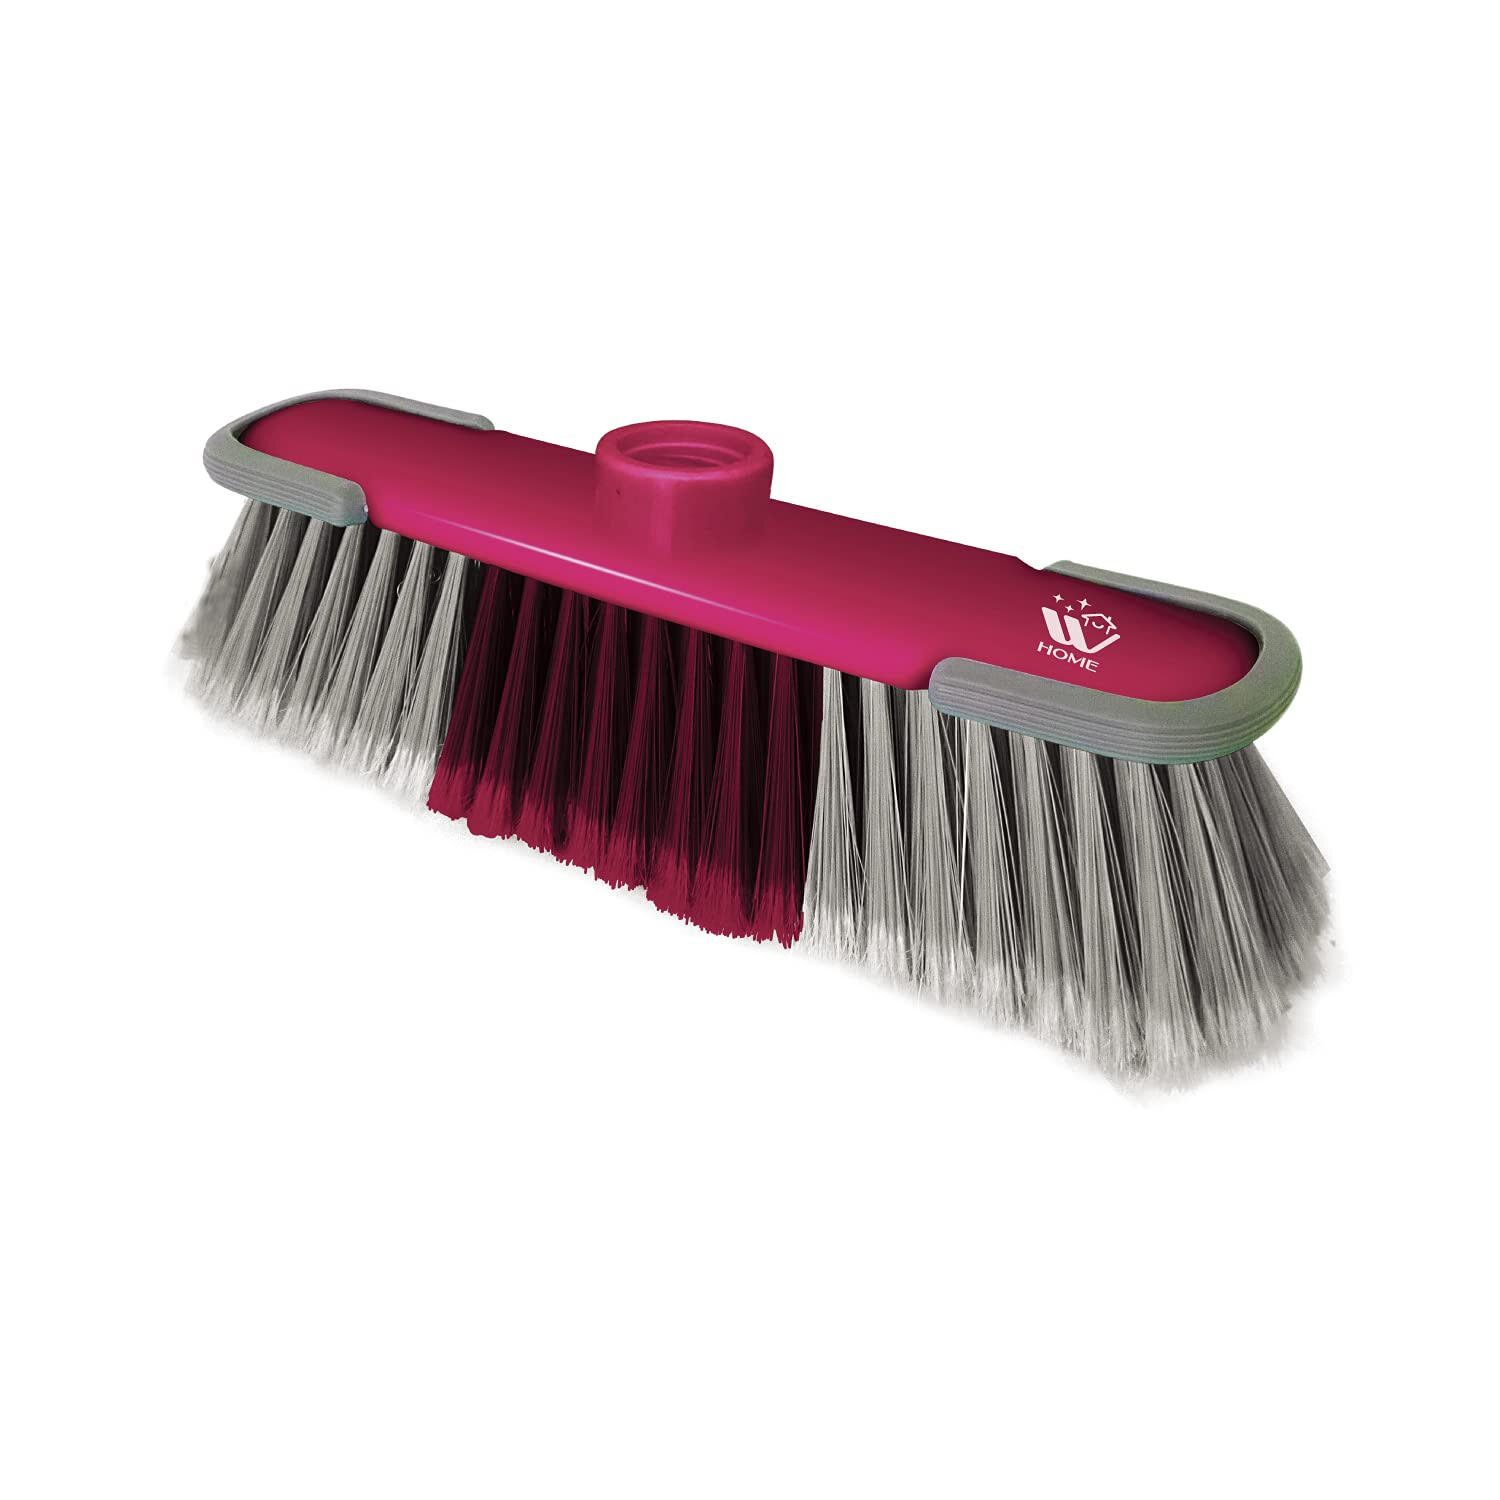 Hand Broom Cleaning Brushes-Soft Bristles Dusting Brush for